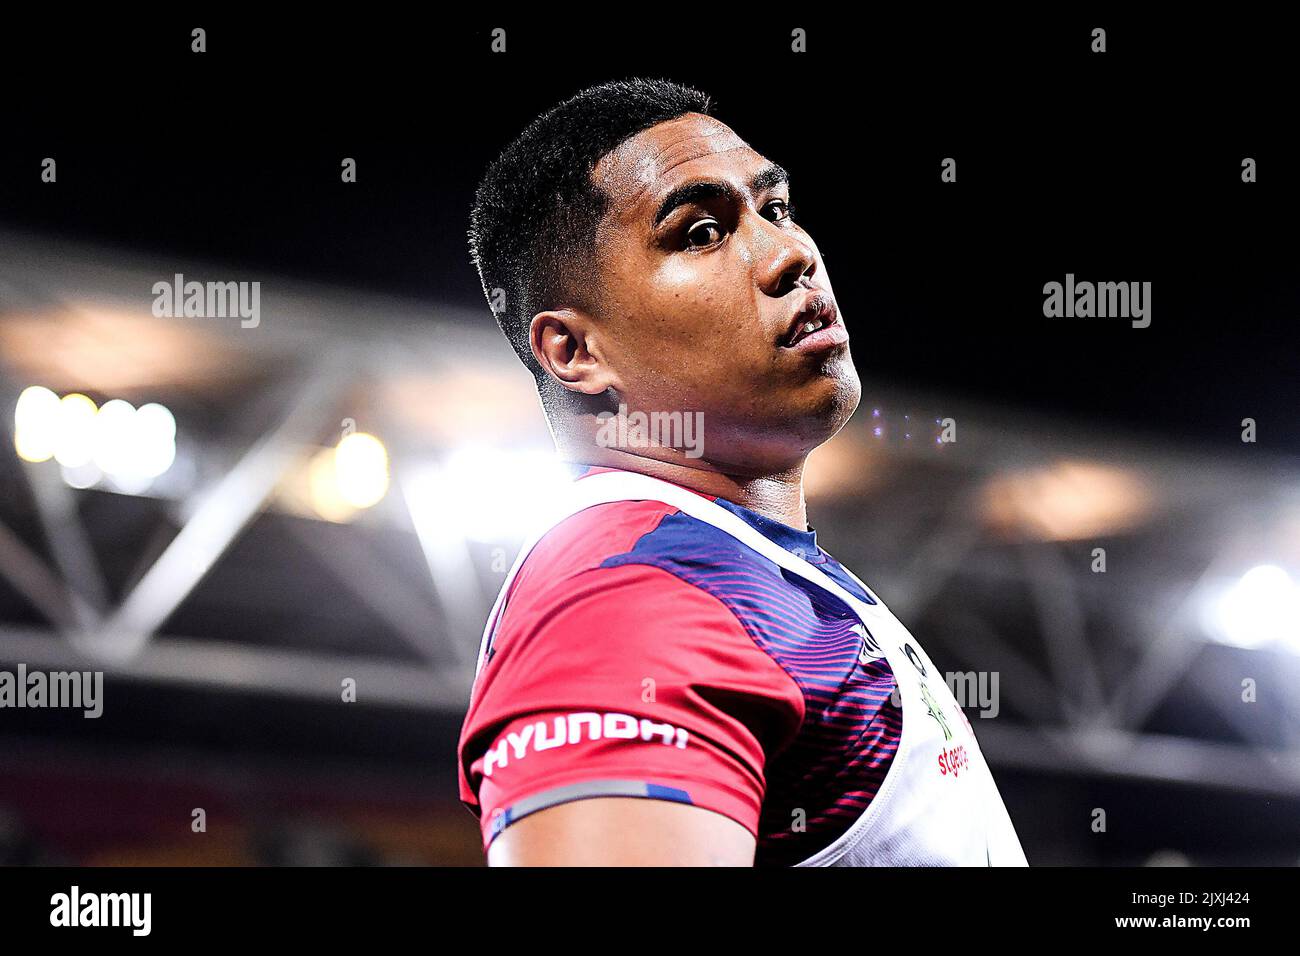 Alex Mafi of the Reds is seen during warm up prior to the Round 18 Super  Rugby match between the Queensland Reds and the Melbourne Rebels at Suncorp  Stadium in Brisbane, Friday,